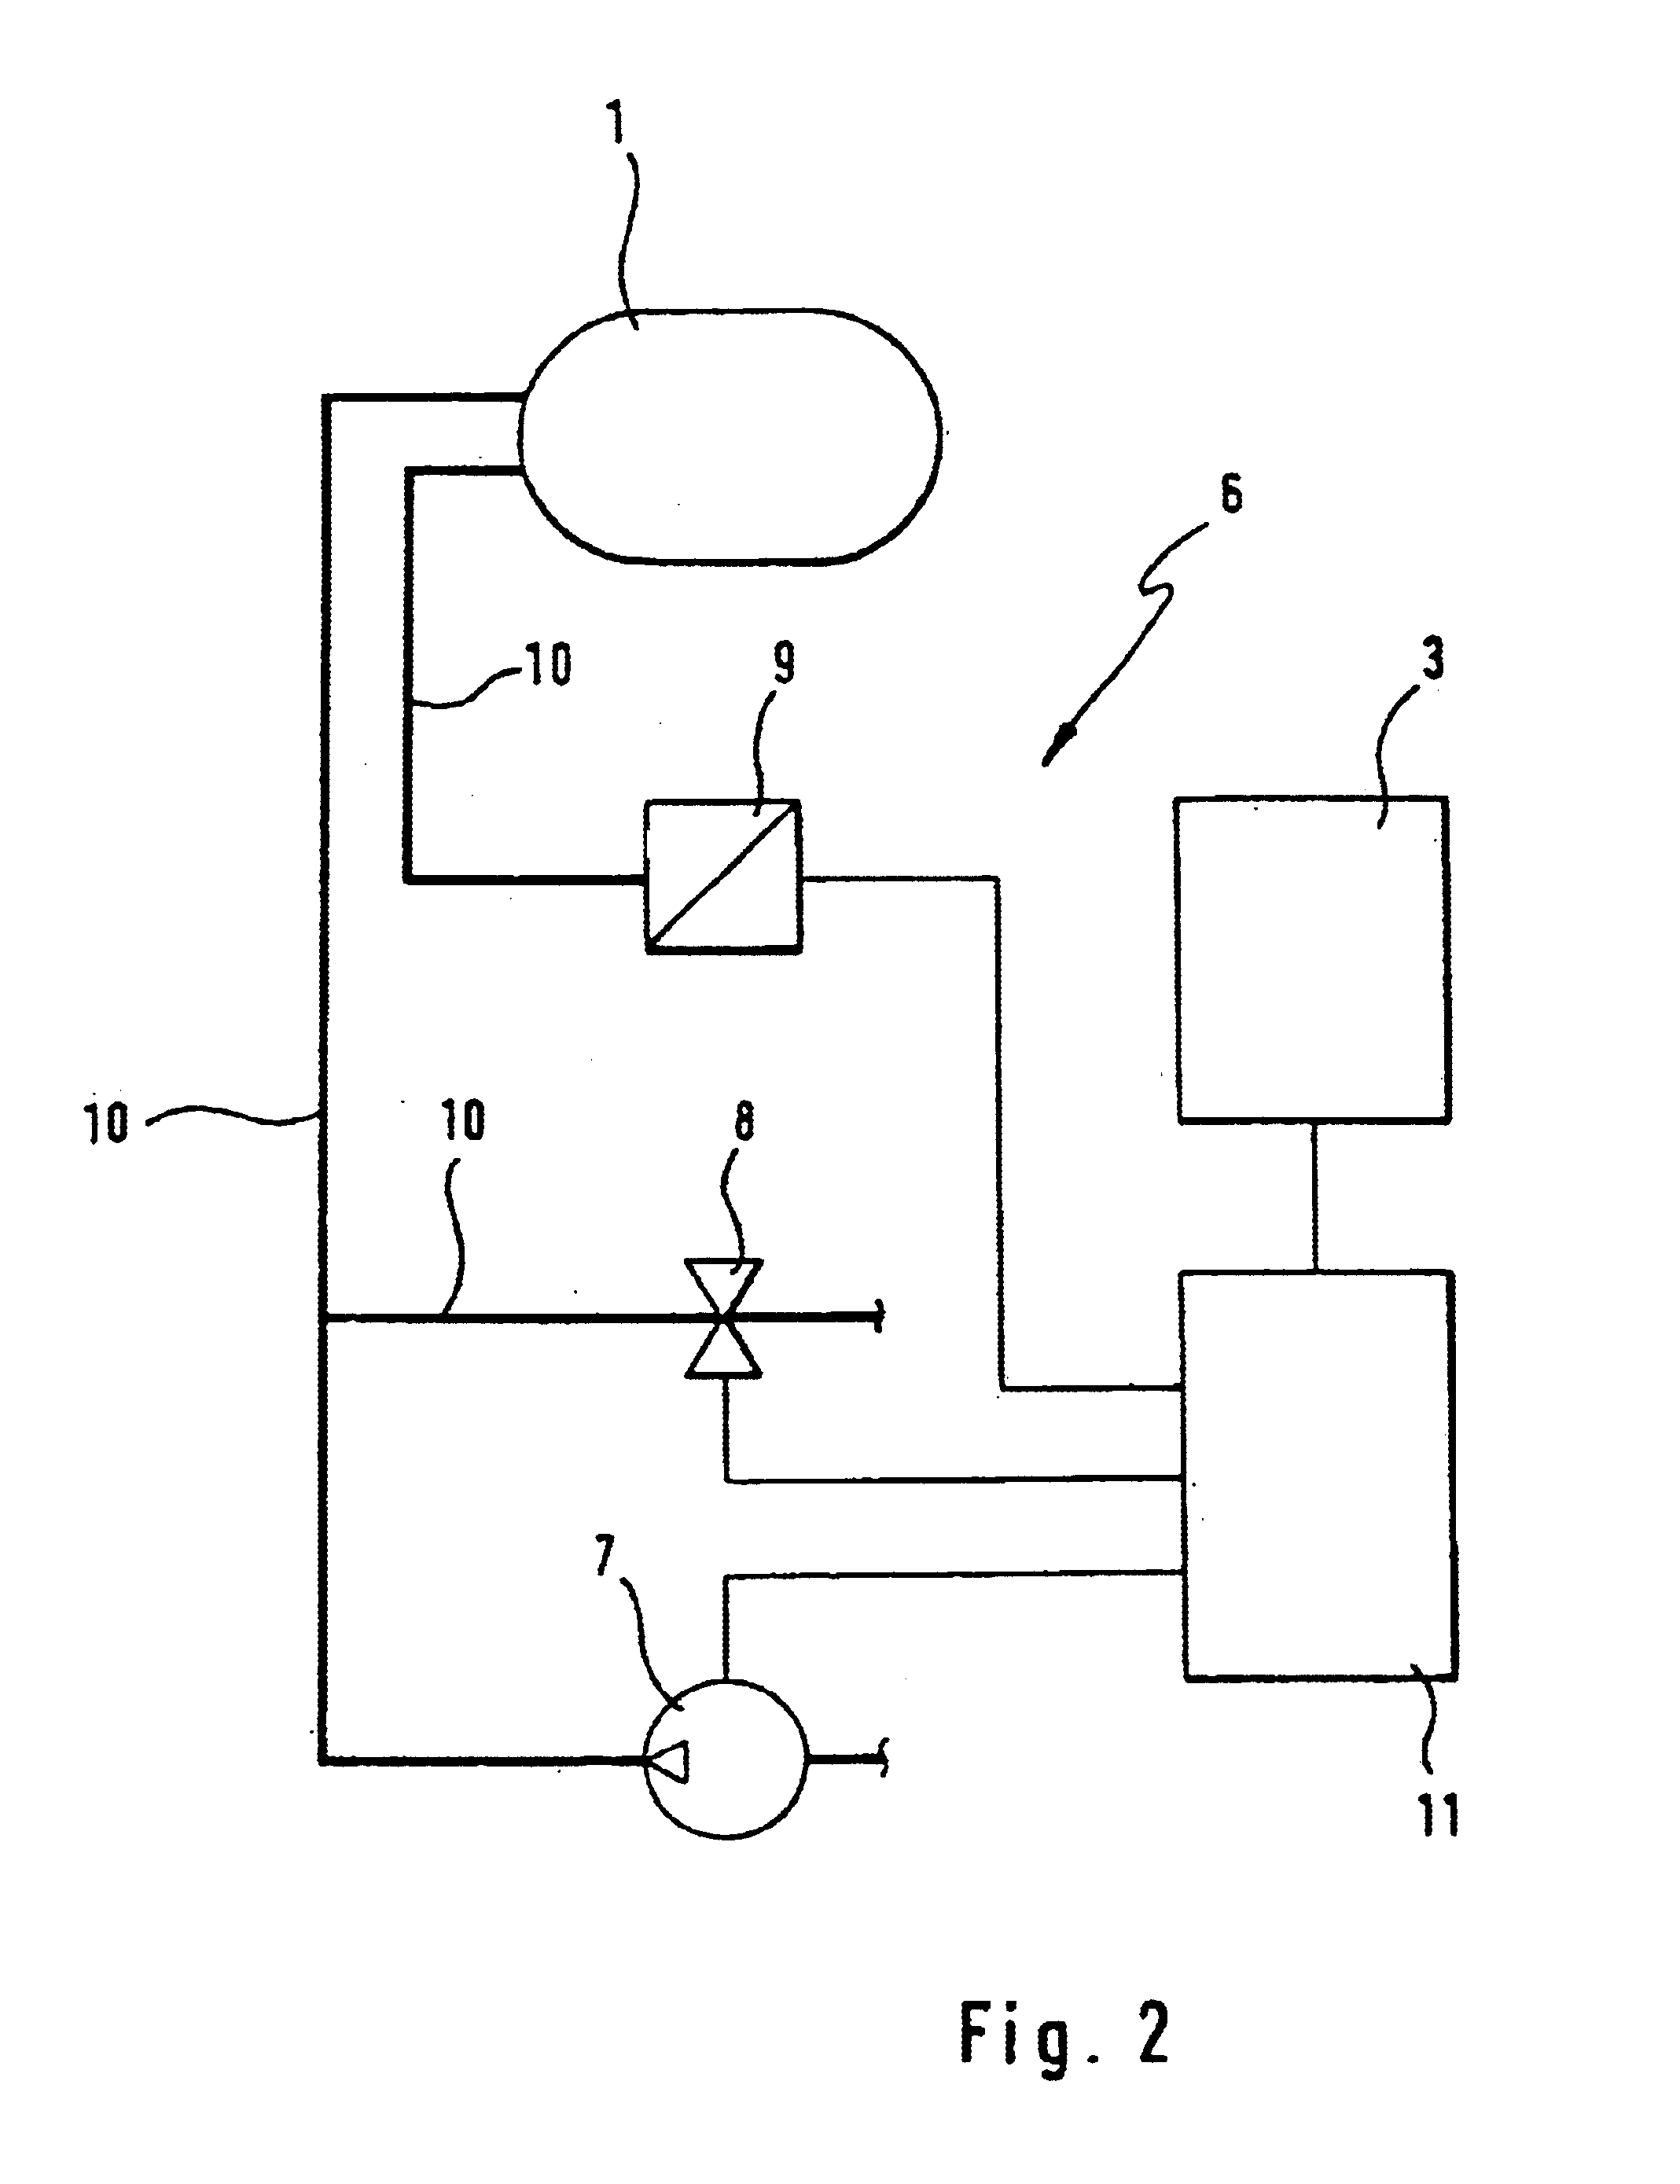 Blood pressure monitoring device and method of manufacturing a parts mounting module of a blood pressure monitoring device